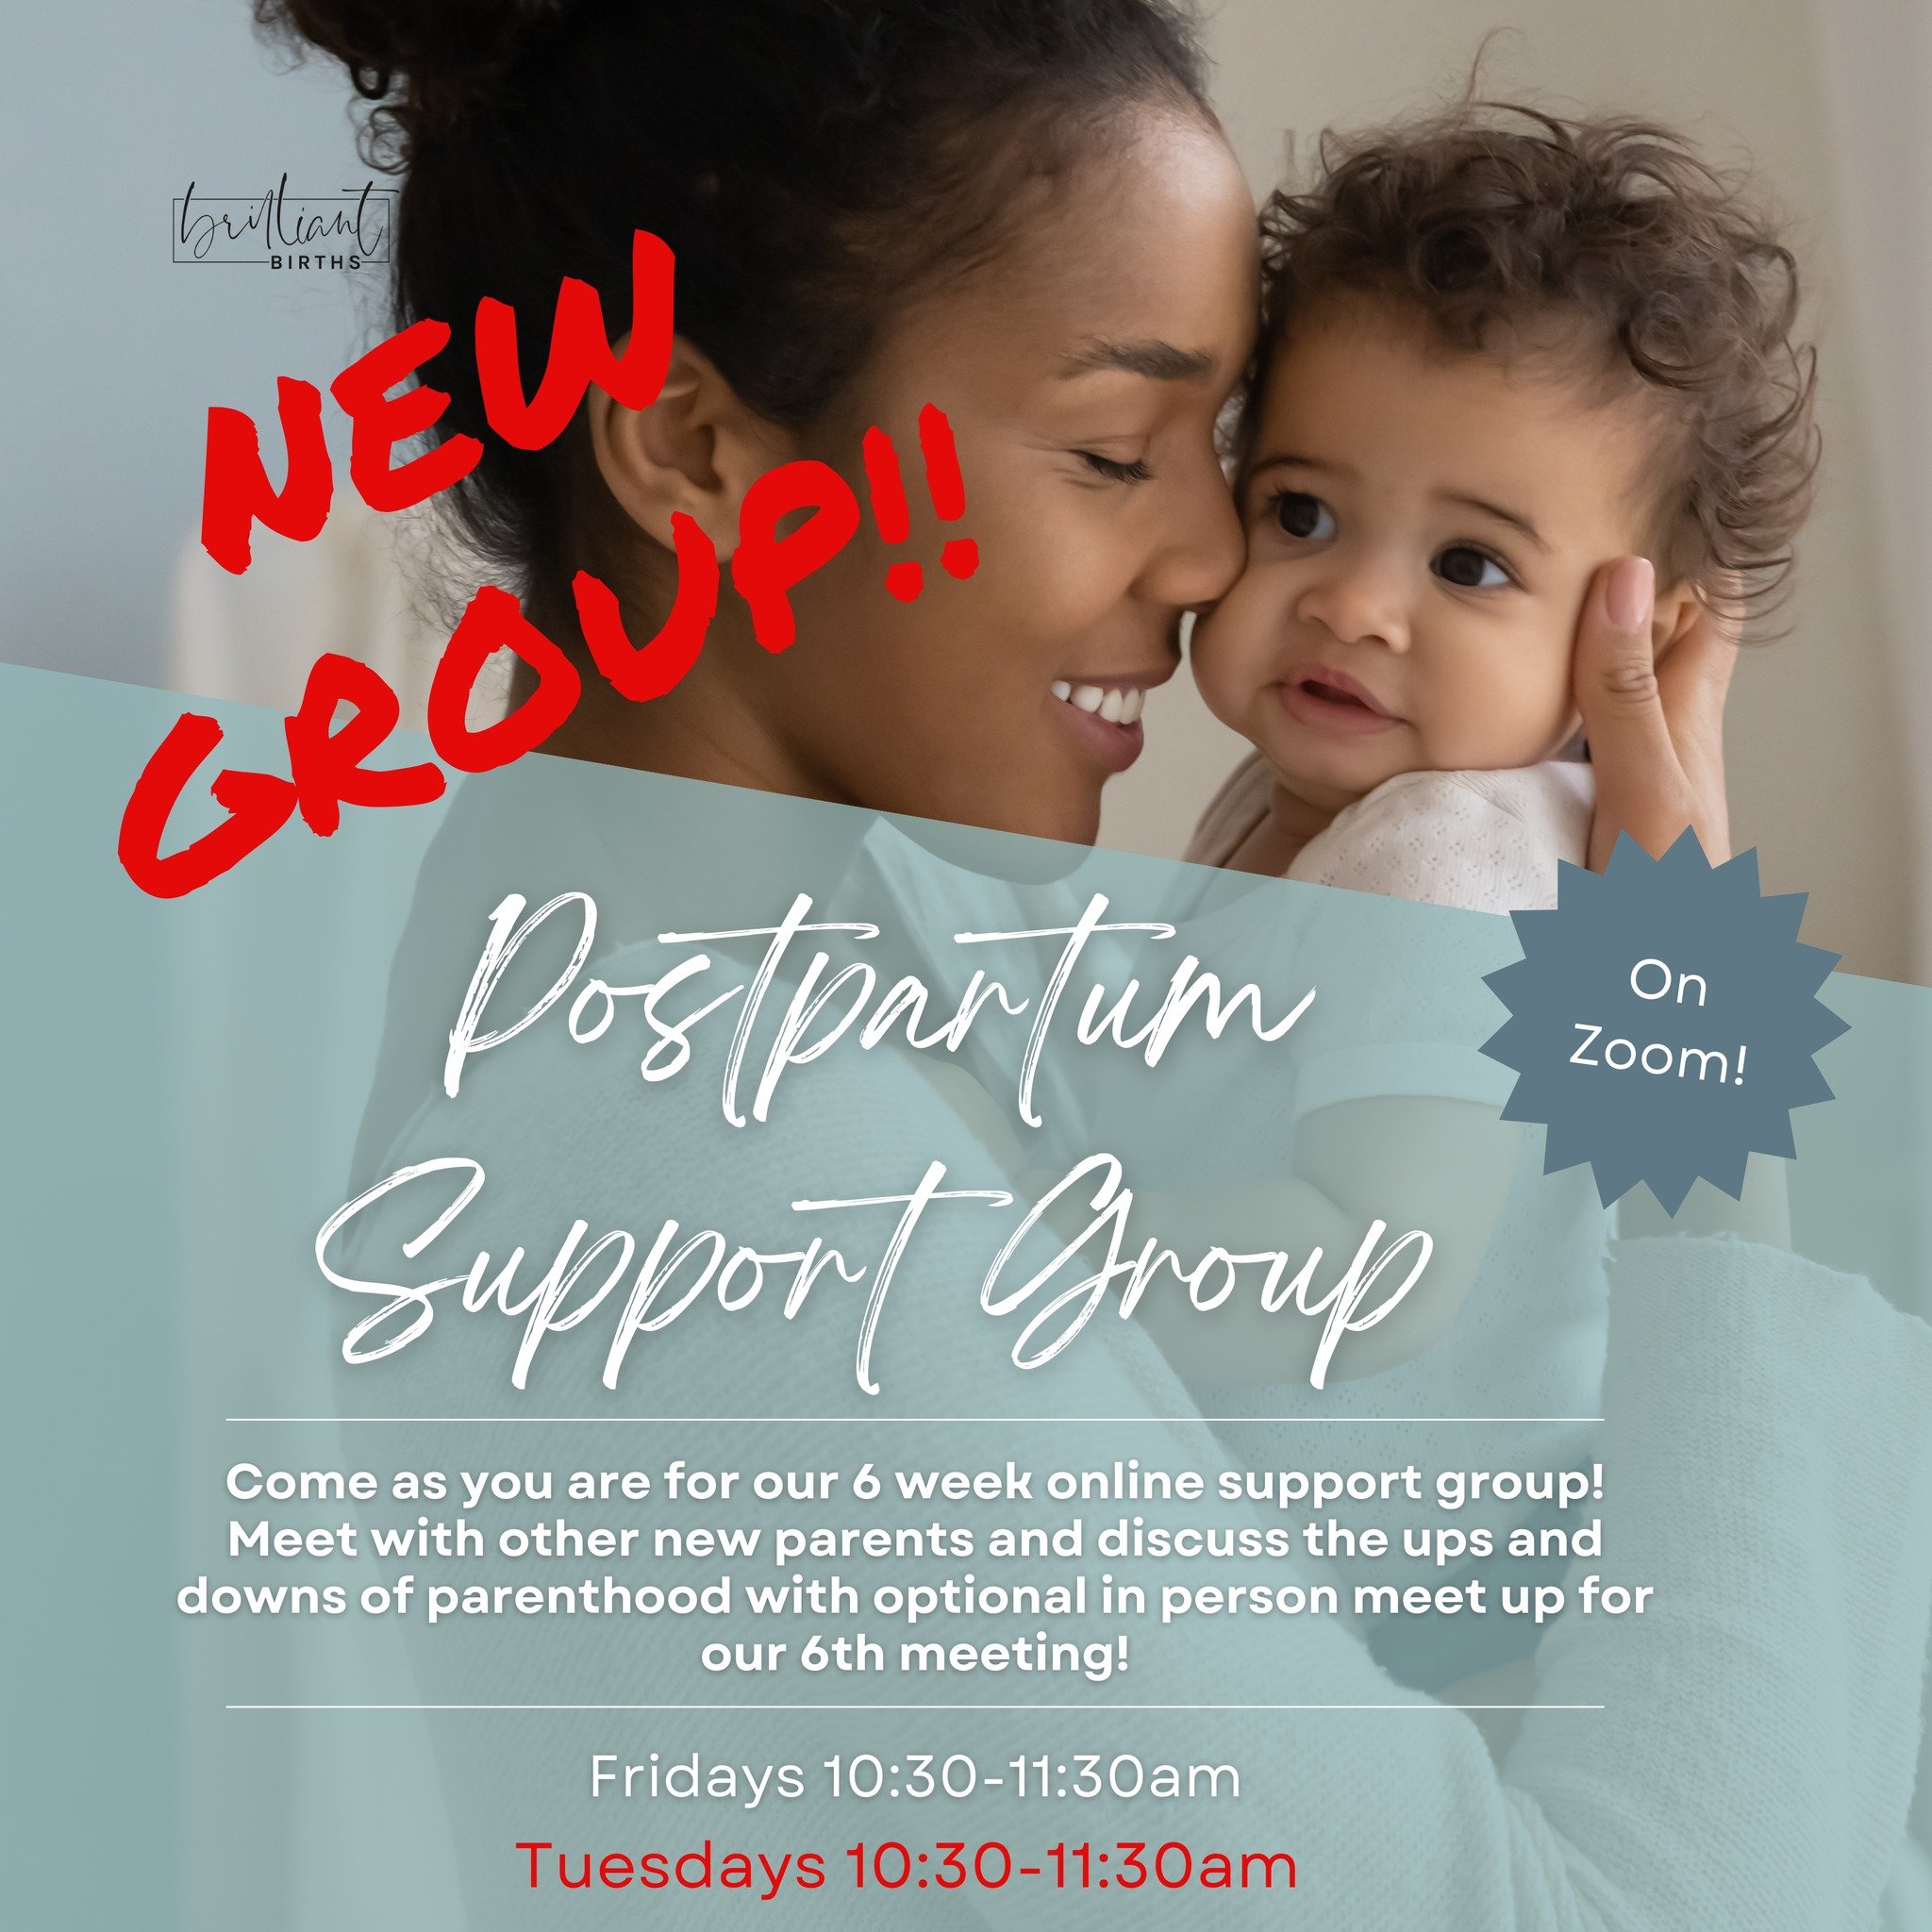 New group starts May 21st! We now have two separate postpartum support groups available. Online, low cost, with 6 week cohorts and a final in-person meeting to cement friendships. Sign up under the Support tab on our website! 

Details:
Online Postpa